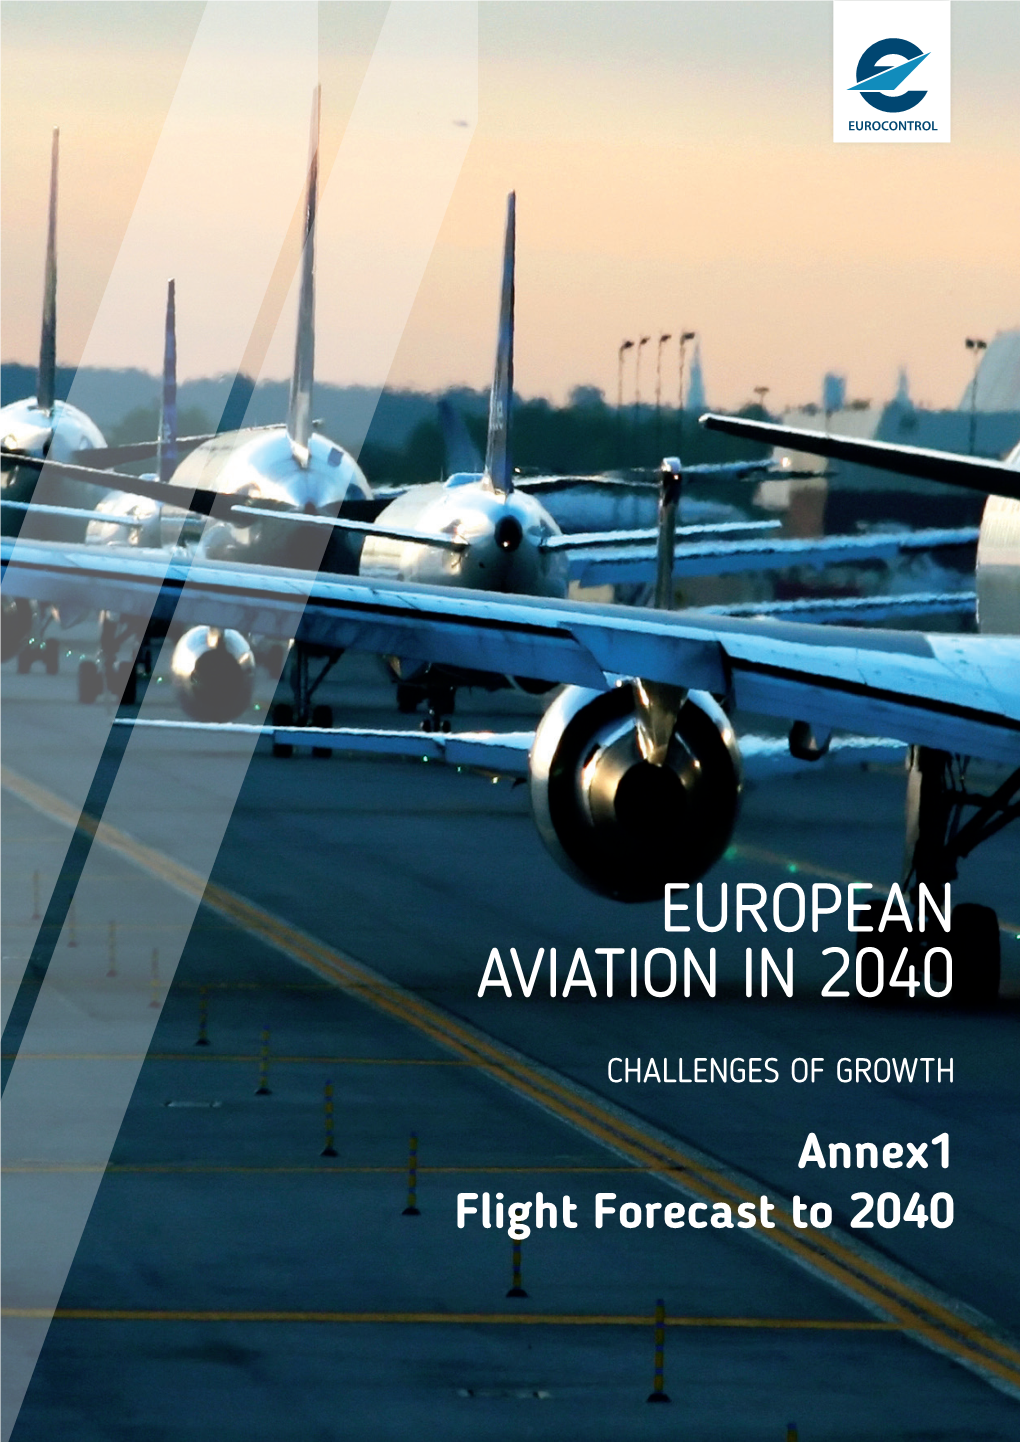 European Aviation in 2040 – Challenges of Growth